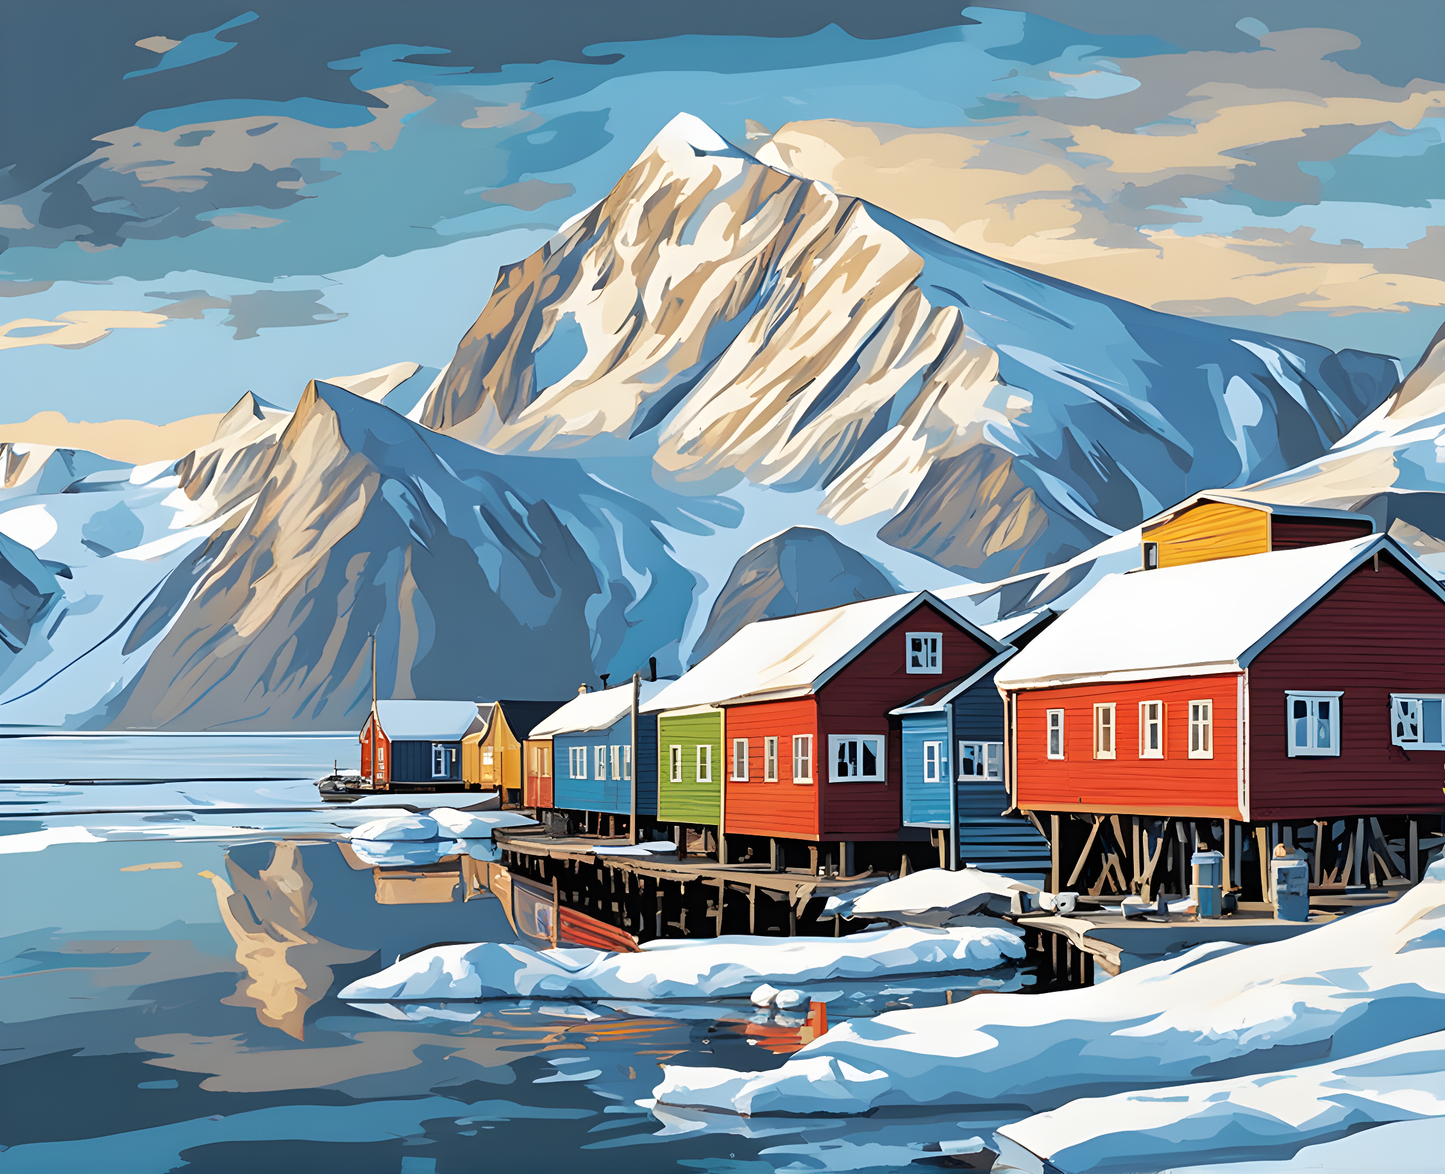 Amazing Places OD (472) - Svalbard, Norway - Van-Go Paint-By-Number Kit